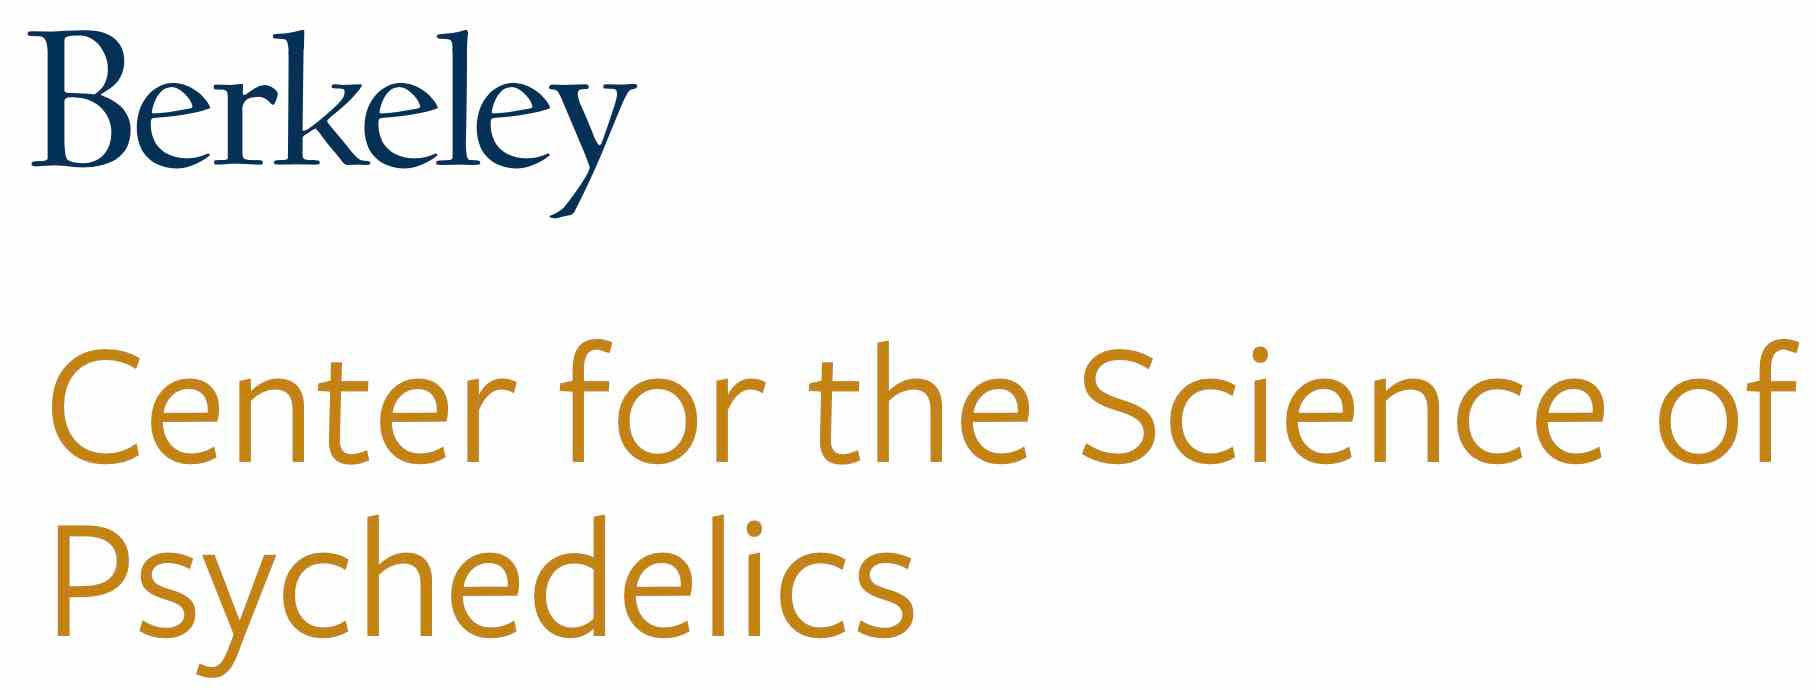 Berkeley Center for the Science of Psychedelics (BCSP)